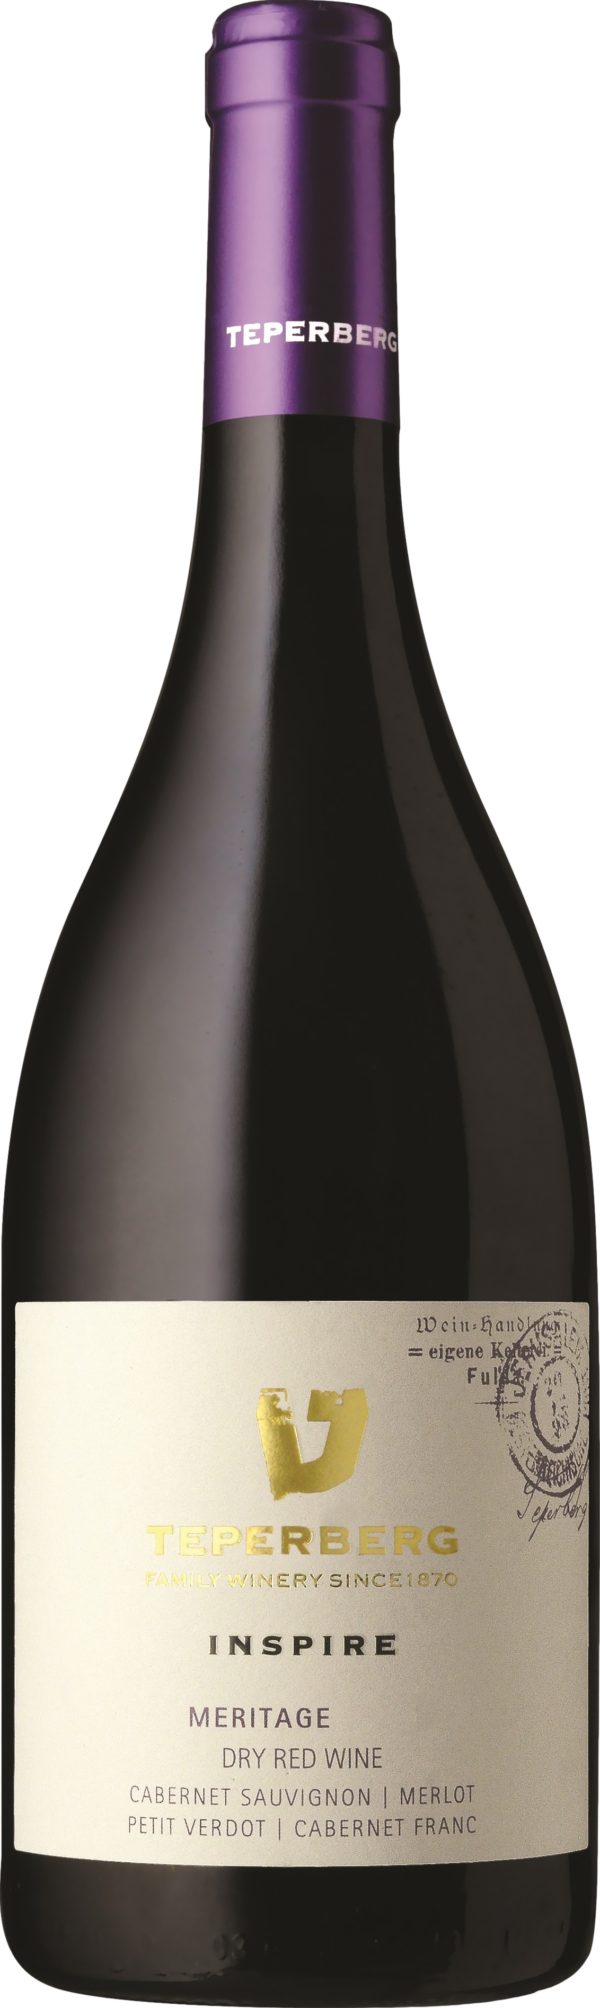 Product image of Teperberg Inspire Meritage 2020 from 8wines